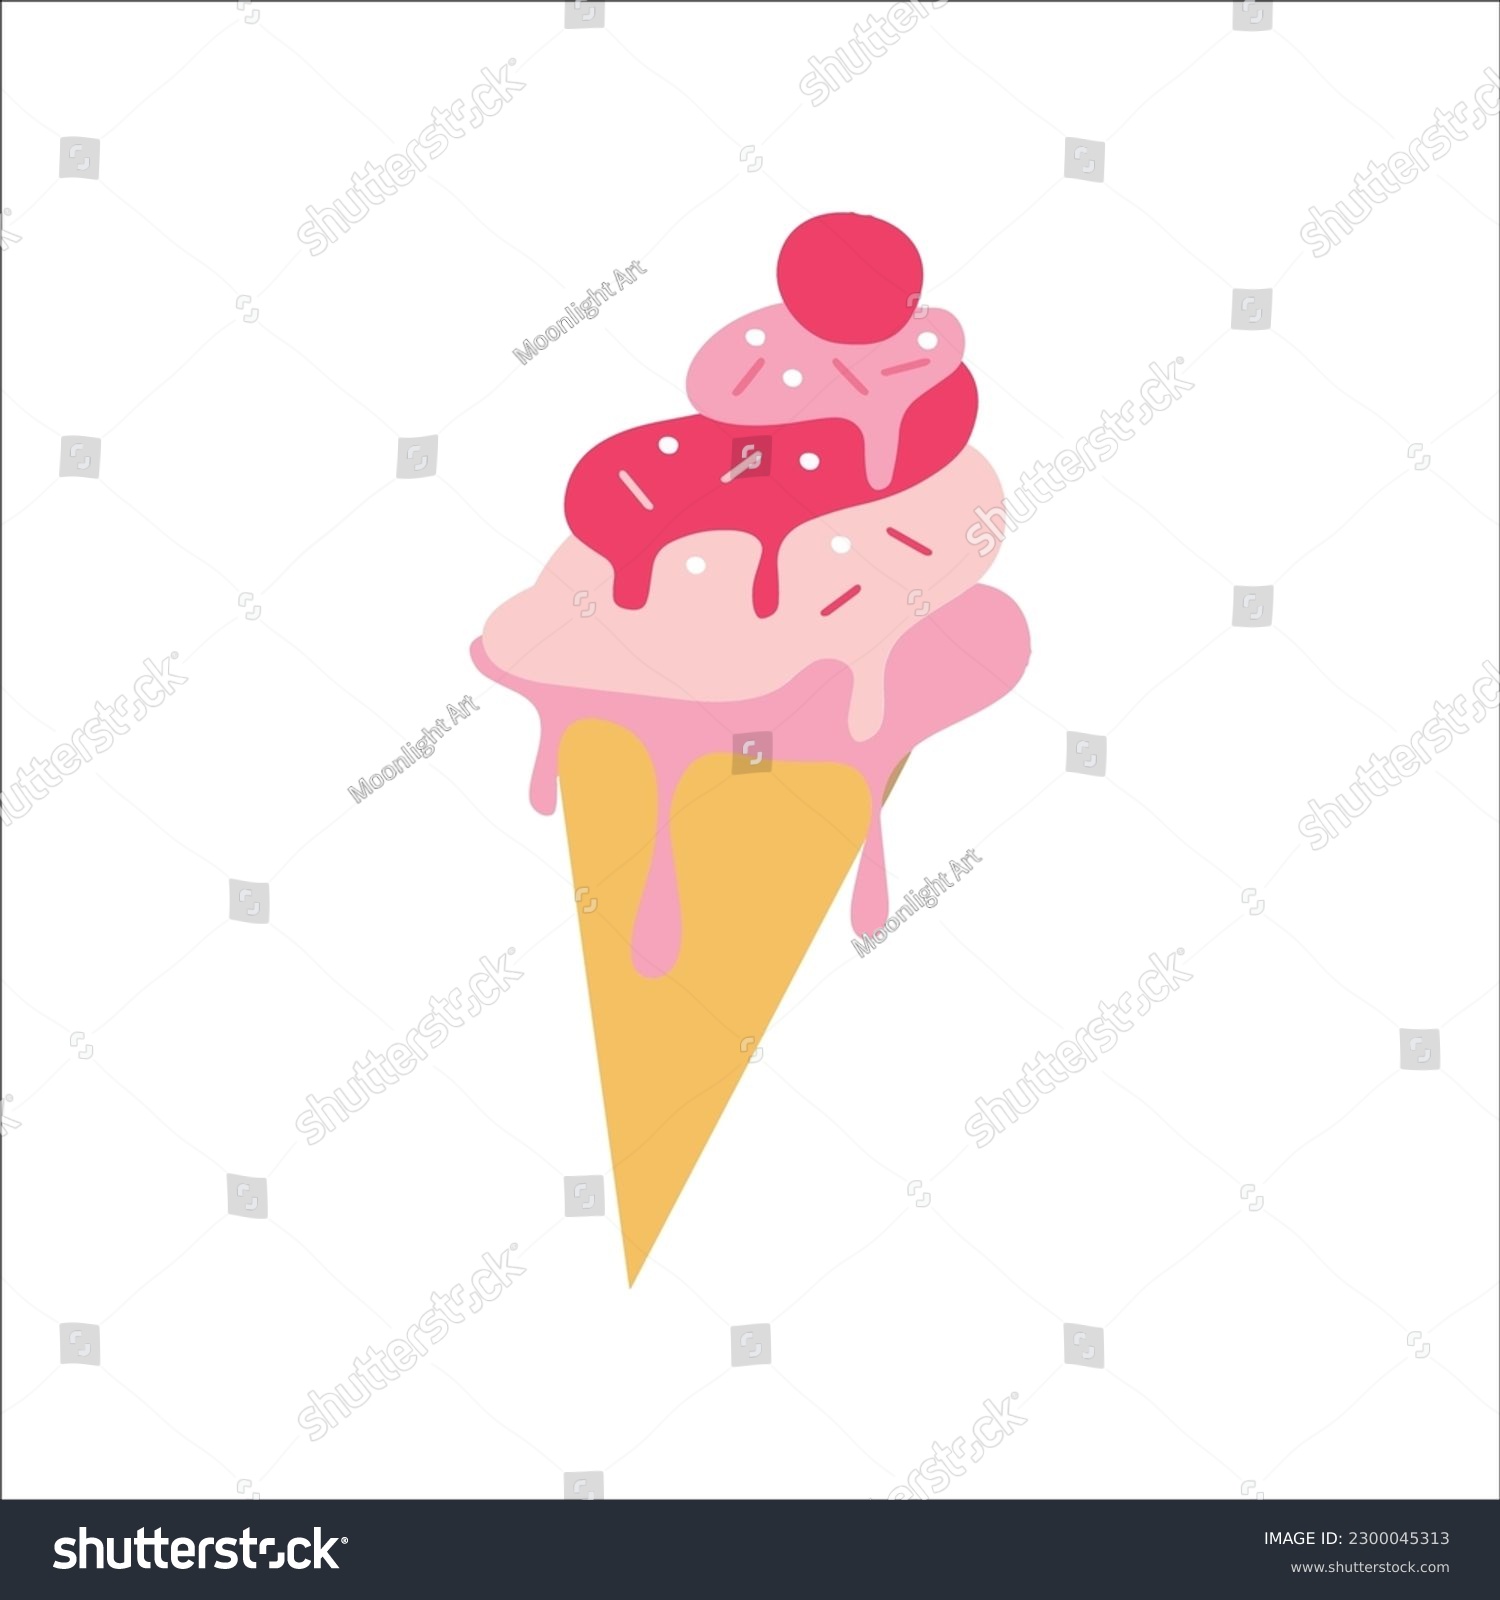 SVG of Ice cream SVG, Sweet Ice Cream SVG, Cute Ice Cream SVG, Cricut, Silhouette, cut file, cut design, Instant Download eps, svg, png svg